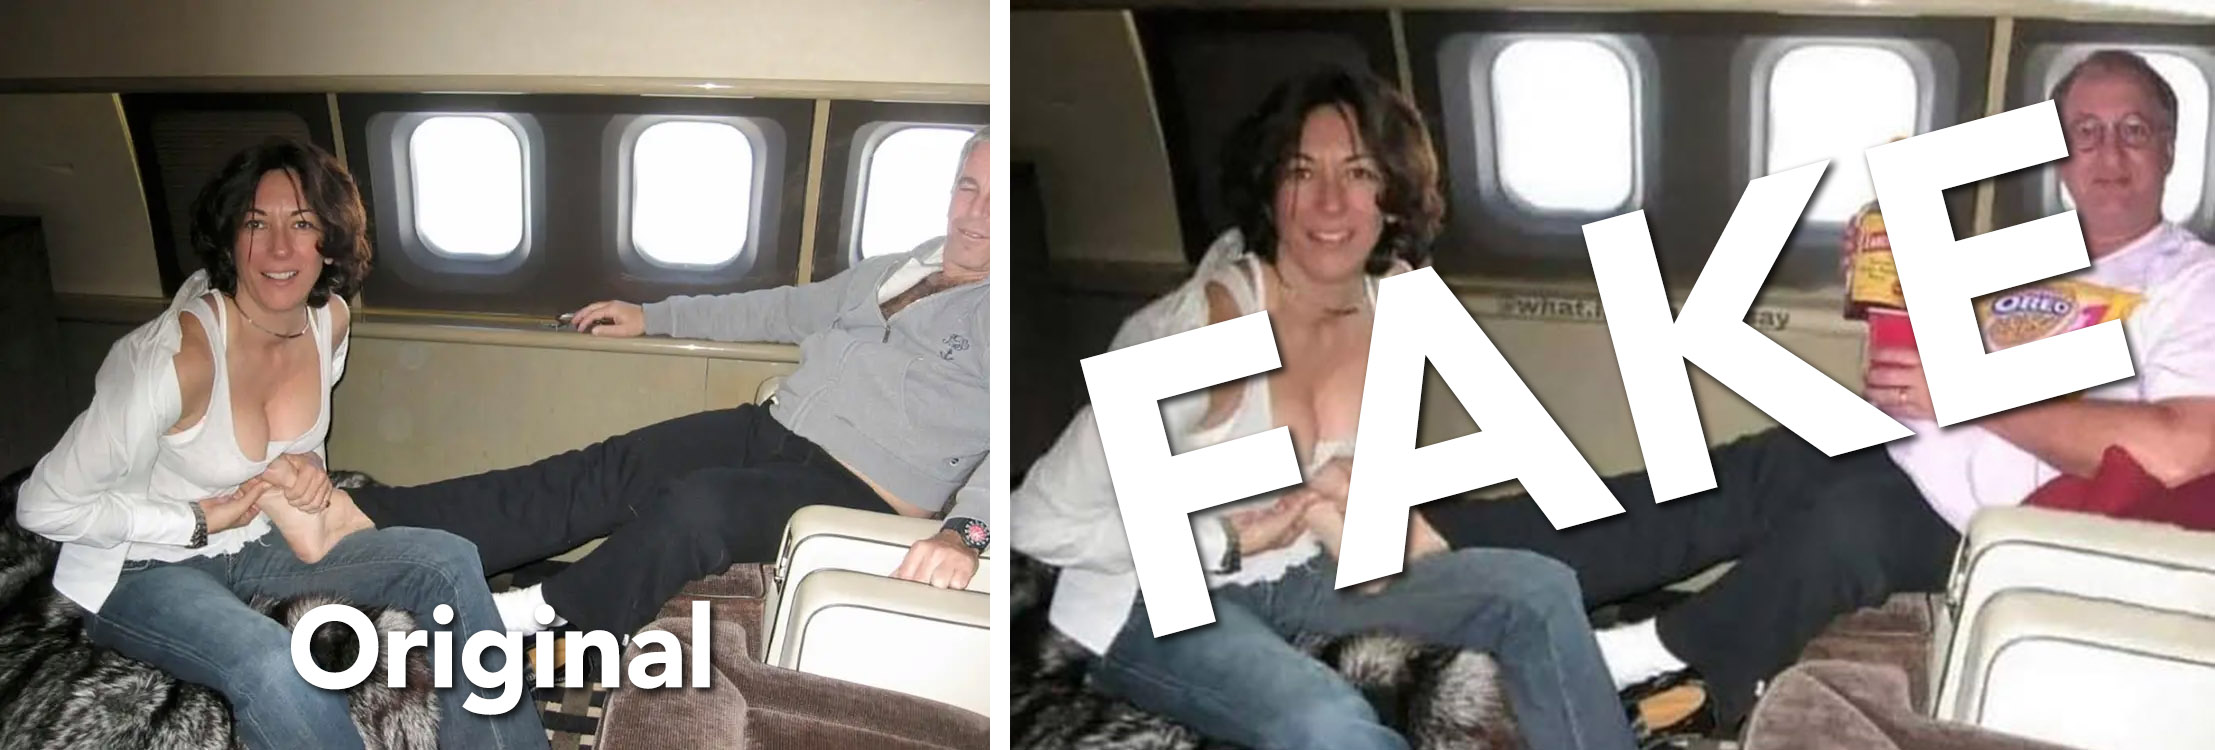 Florida Magistrate Judge Bruce Reinhart was not photographed on an airplane receiving a foot massage from Jeffrey Epstein associate and convicted sex trafficker Ghislaine Maxwell.